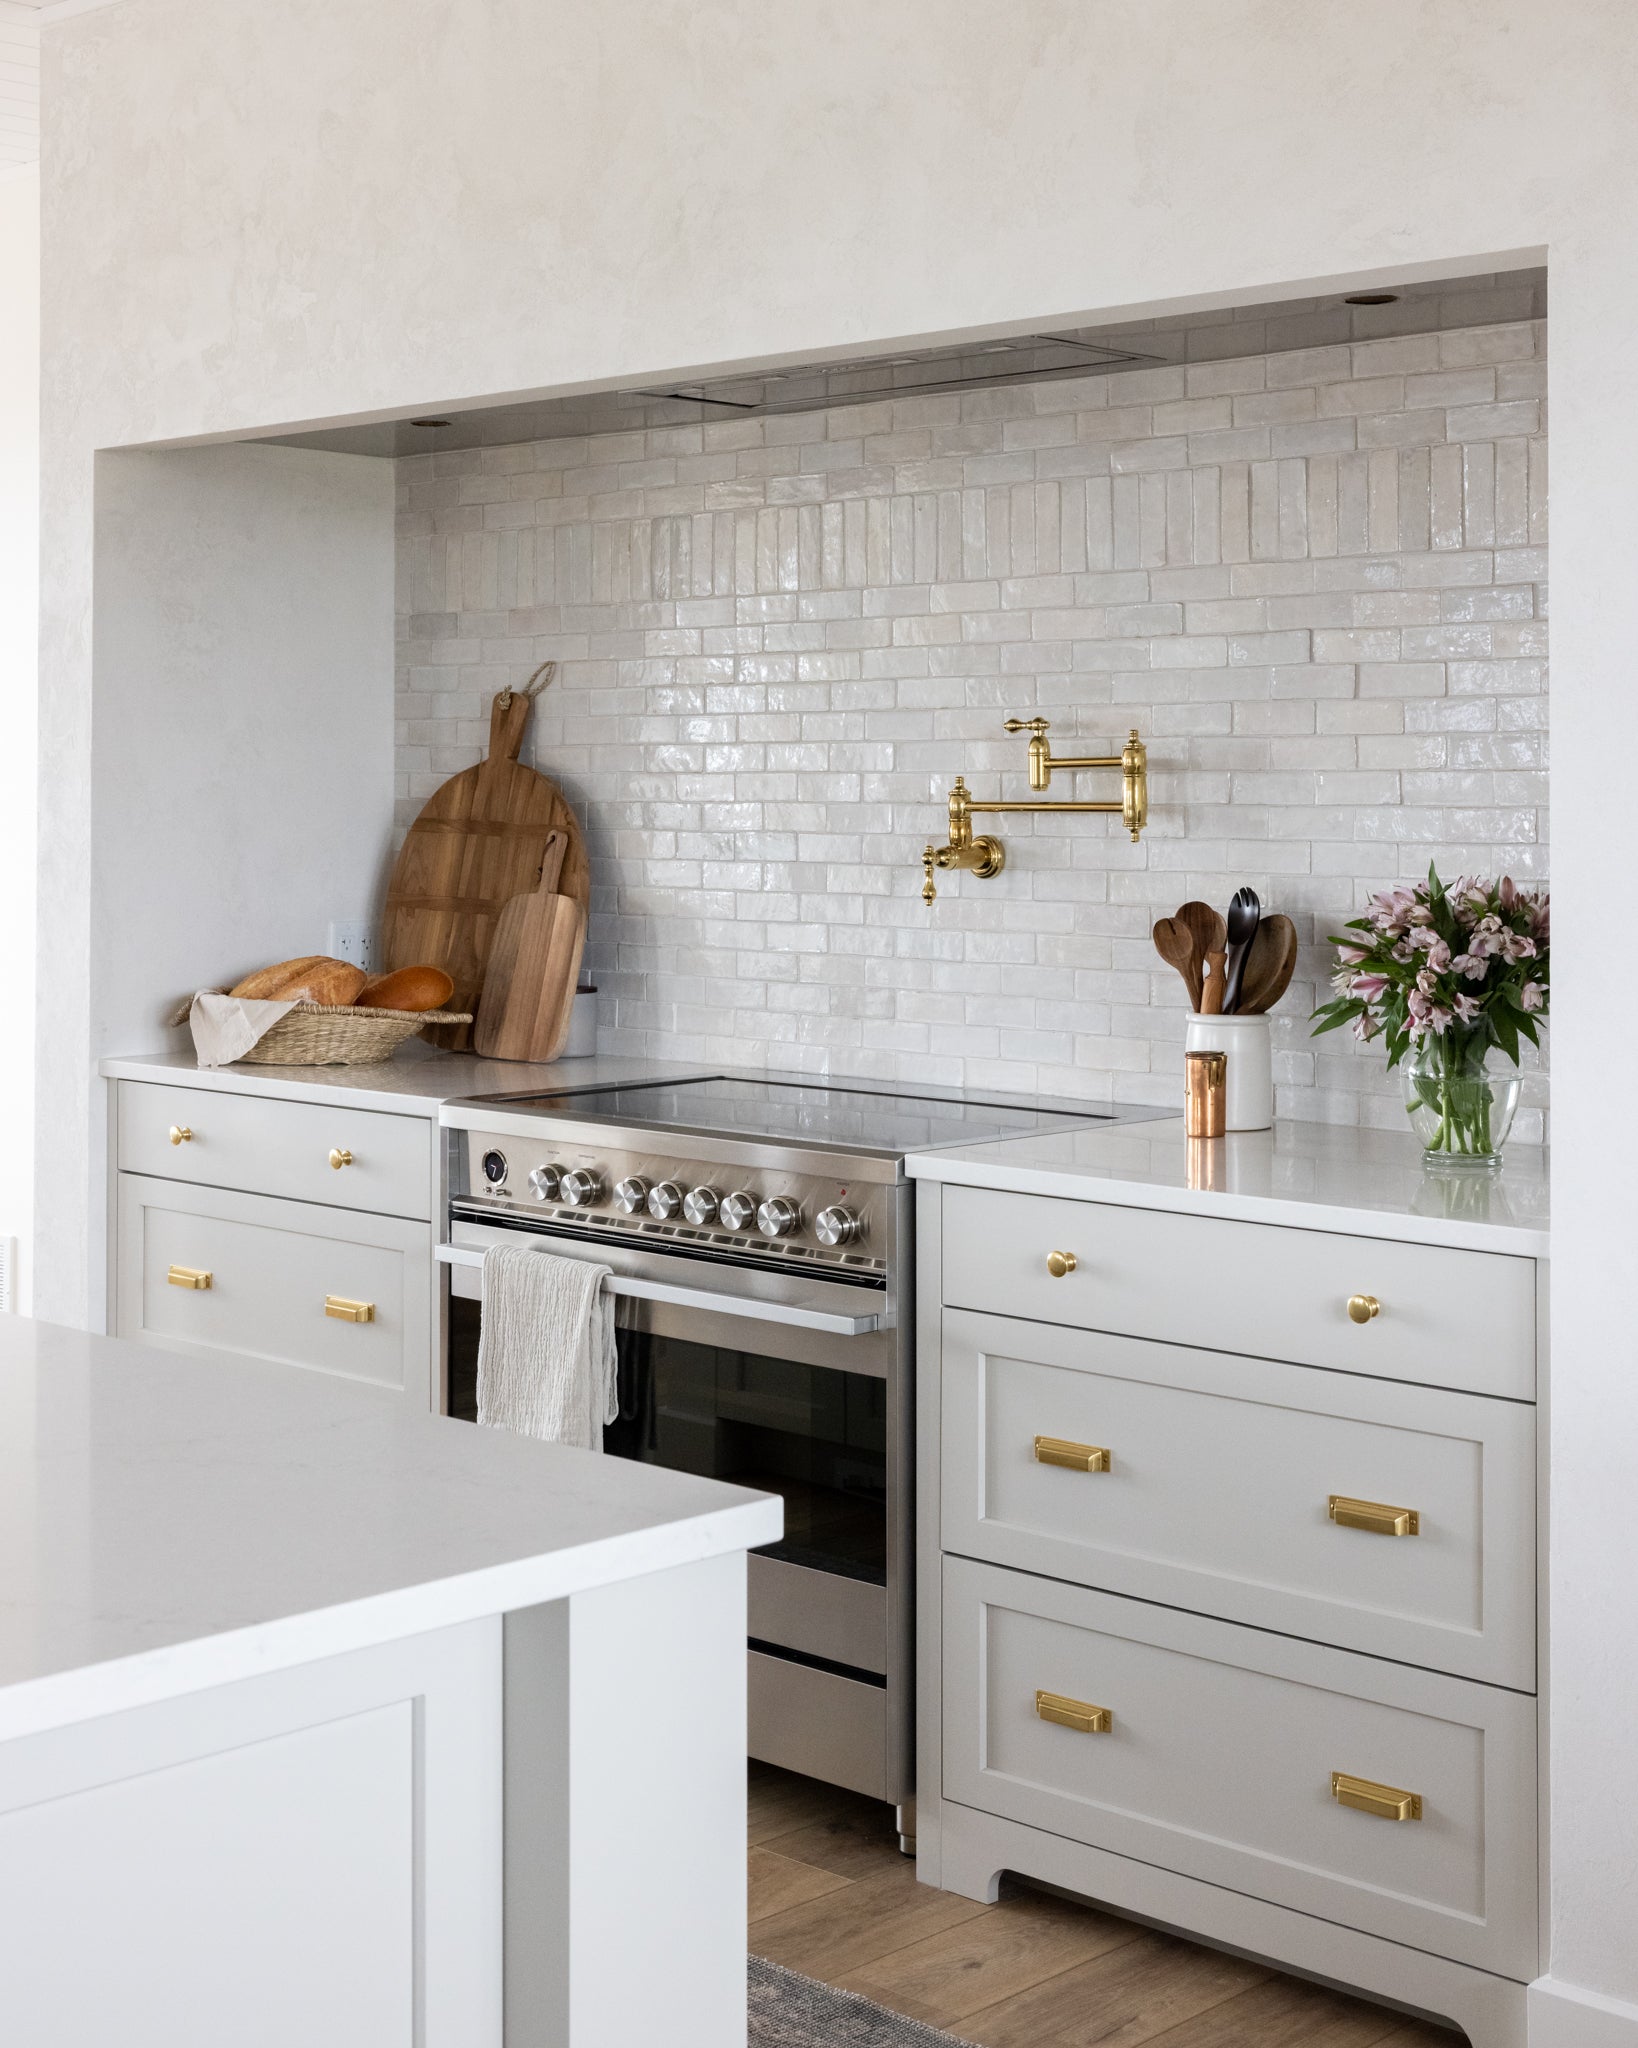 Leclair Home Kitchen Reveal